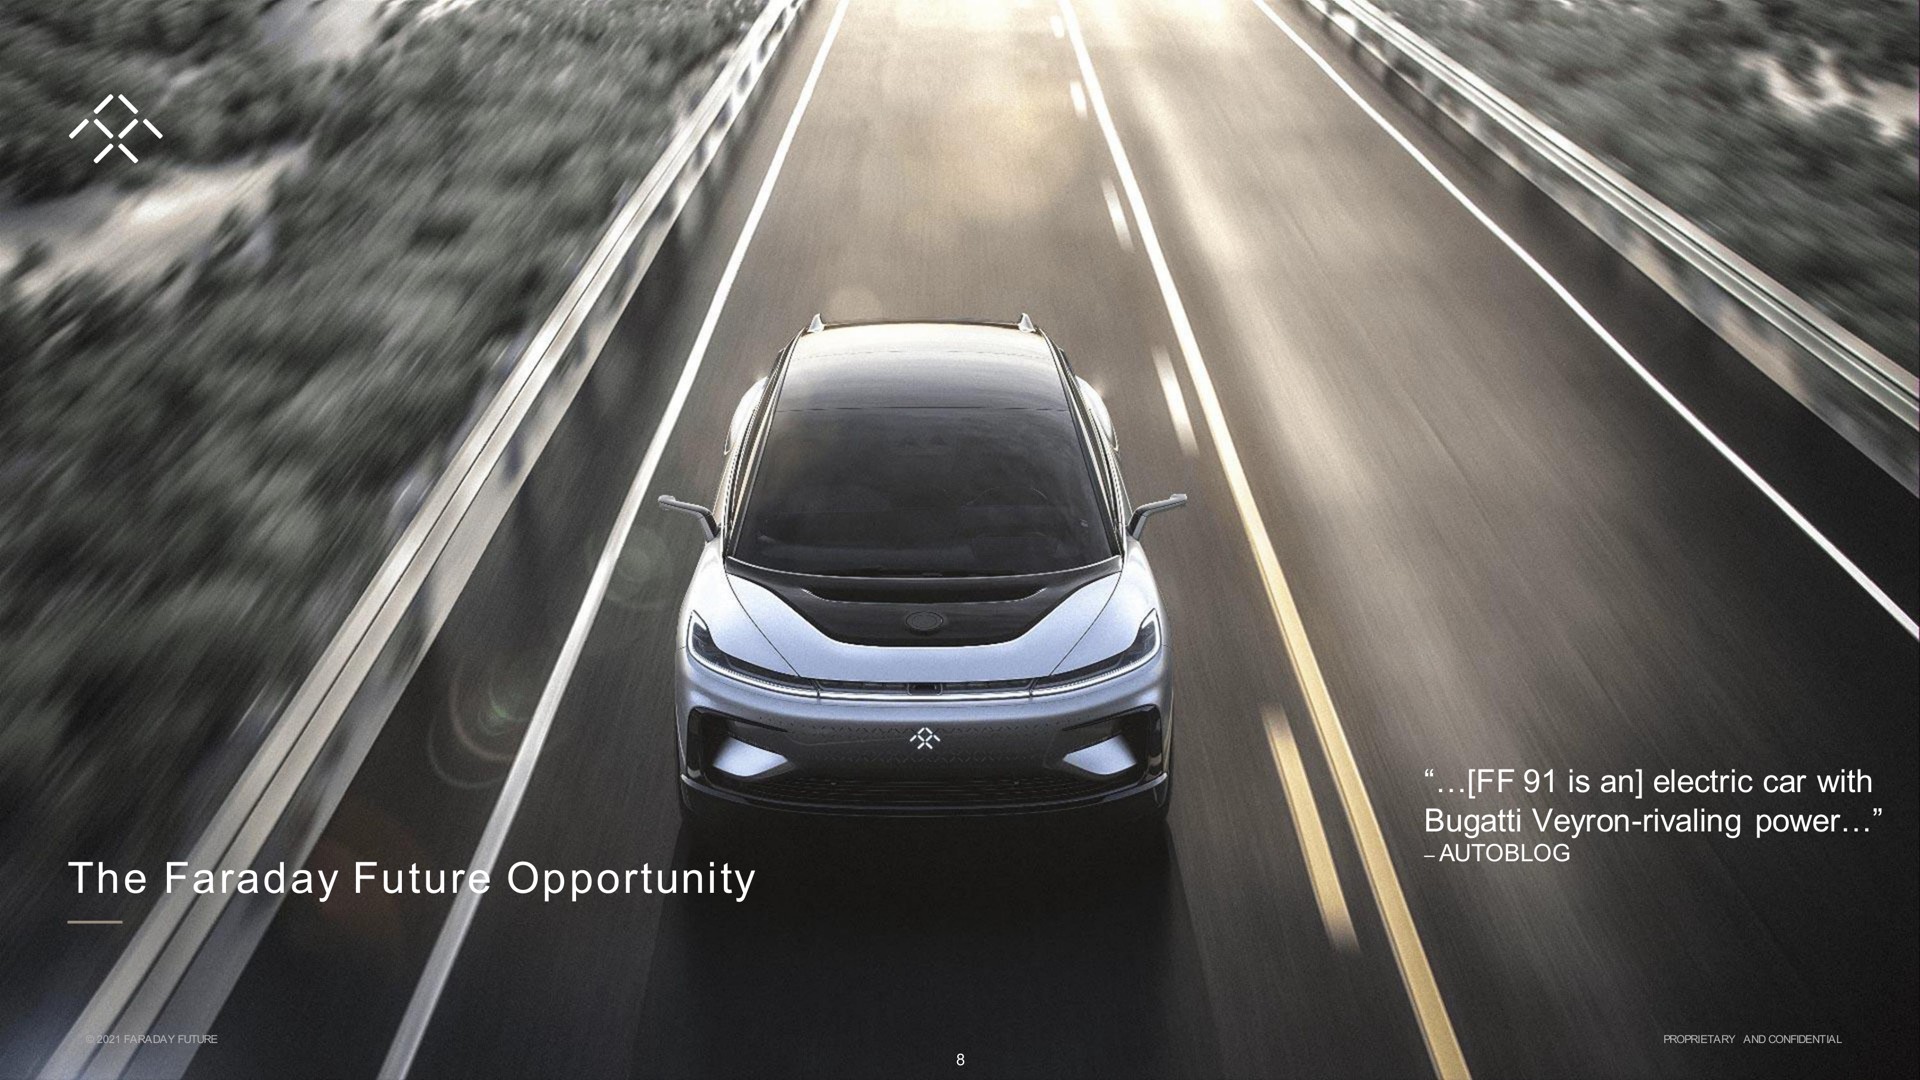 the faraday future opportunity is an electric car with rivaling power soh | Faraday Future